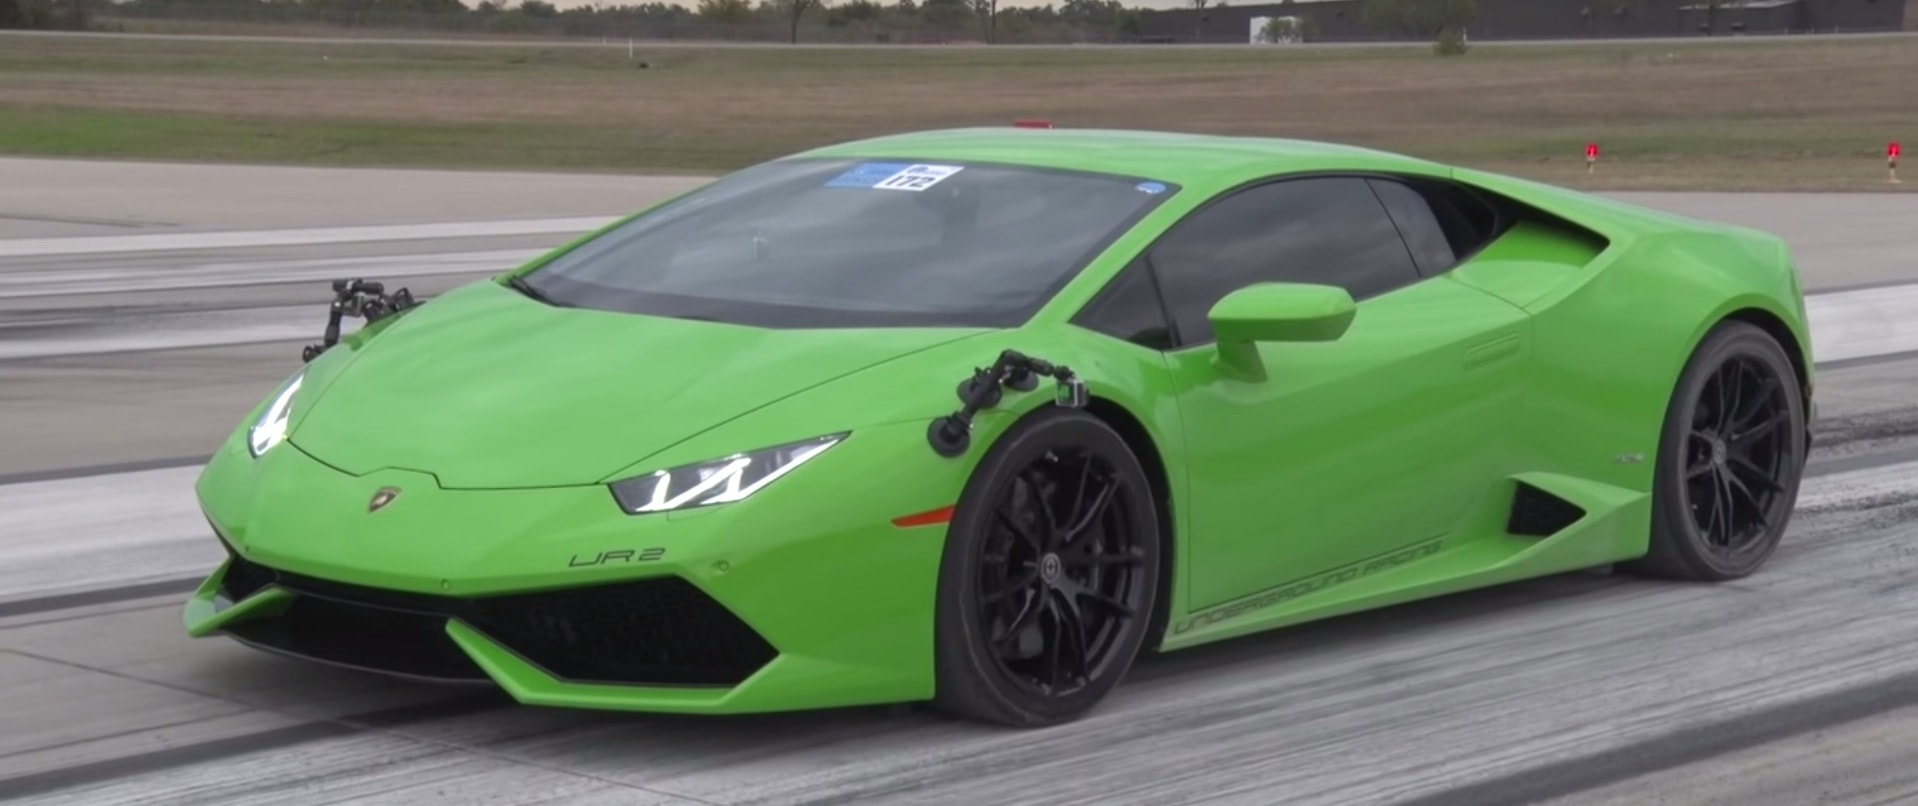 What Is the Fastest Lamborghini in the World?